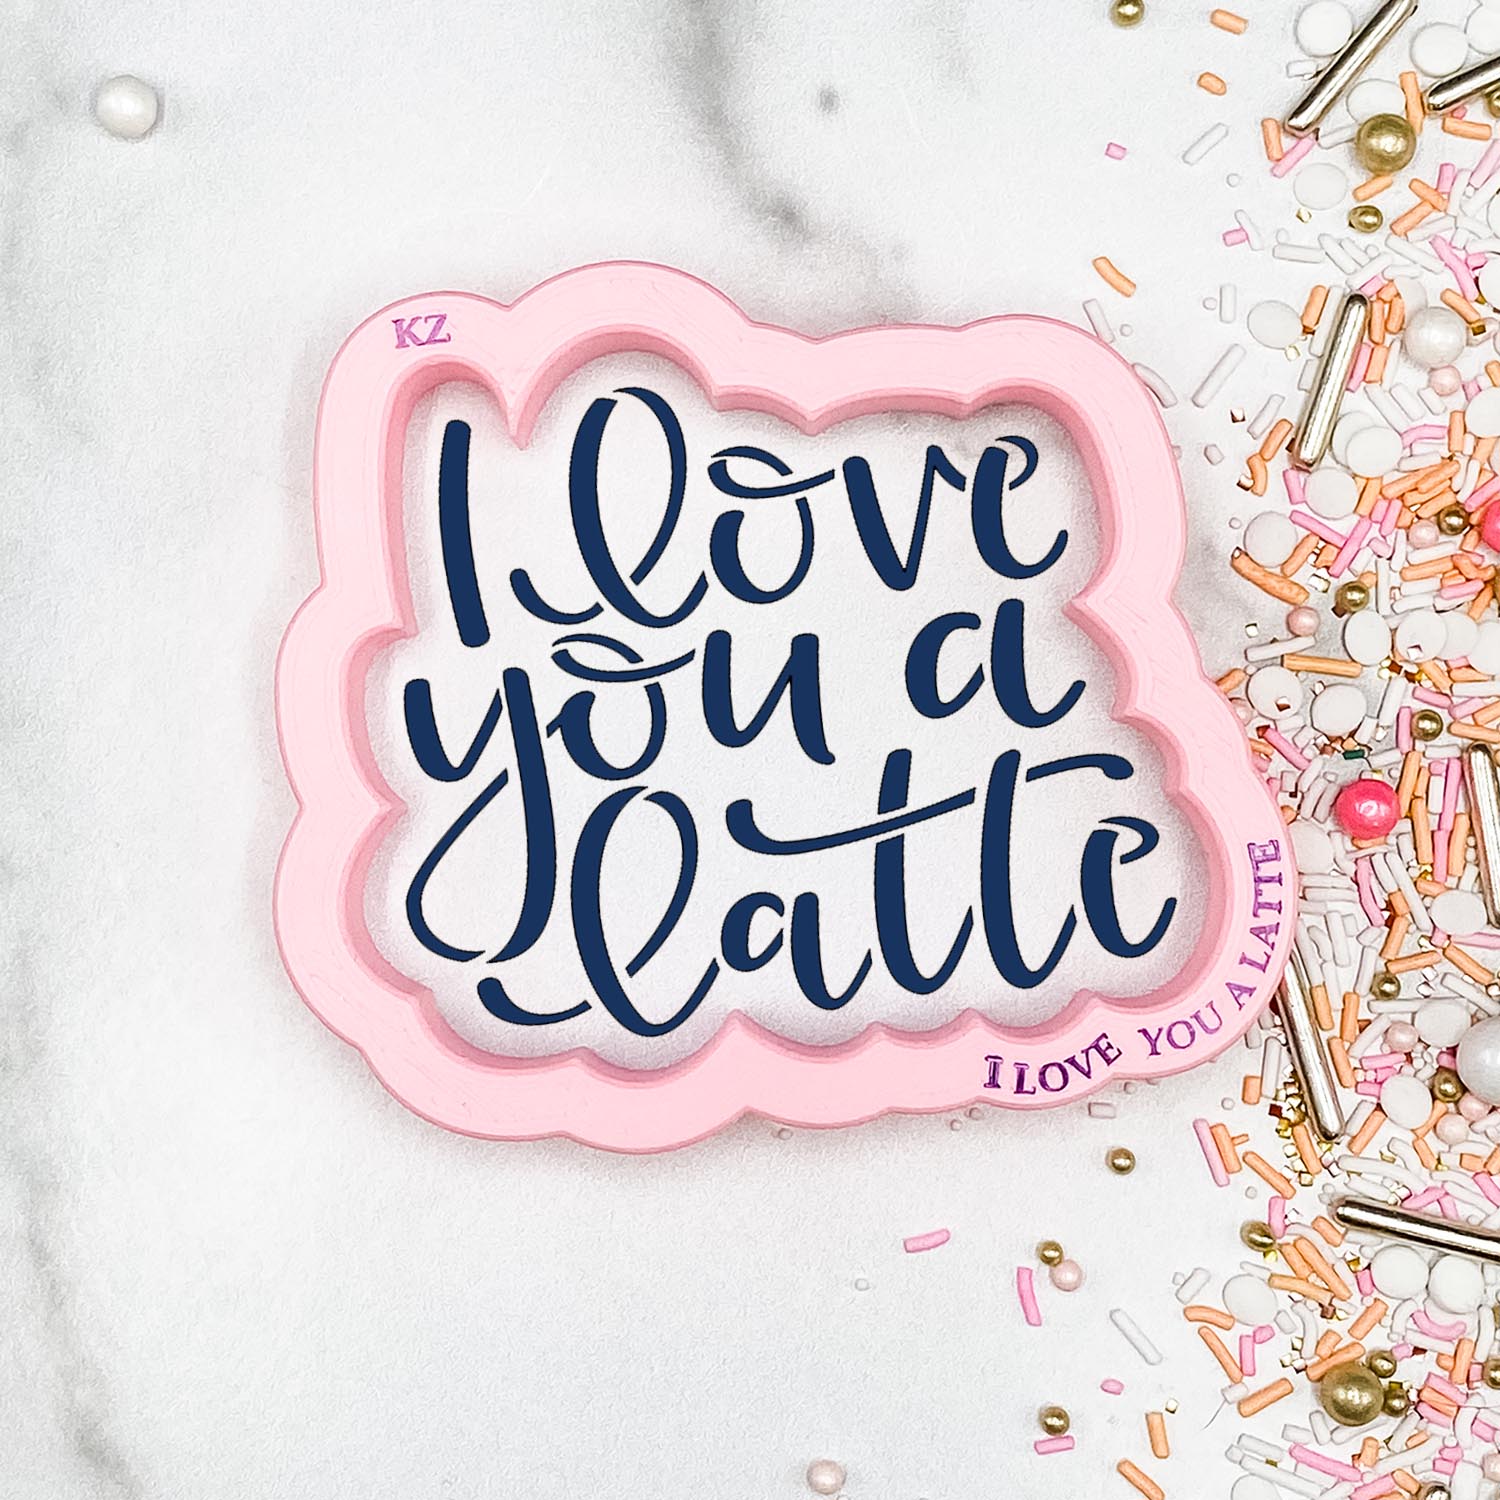 I Love You a Latte Hand Lettered